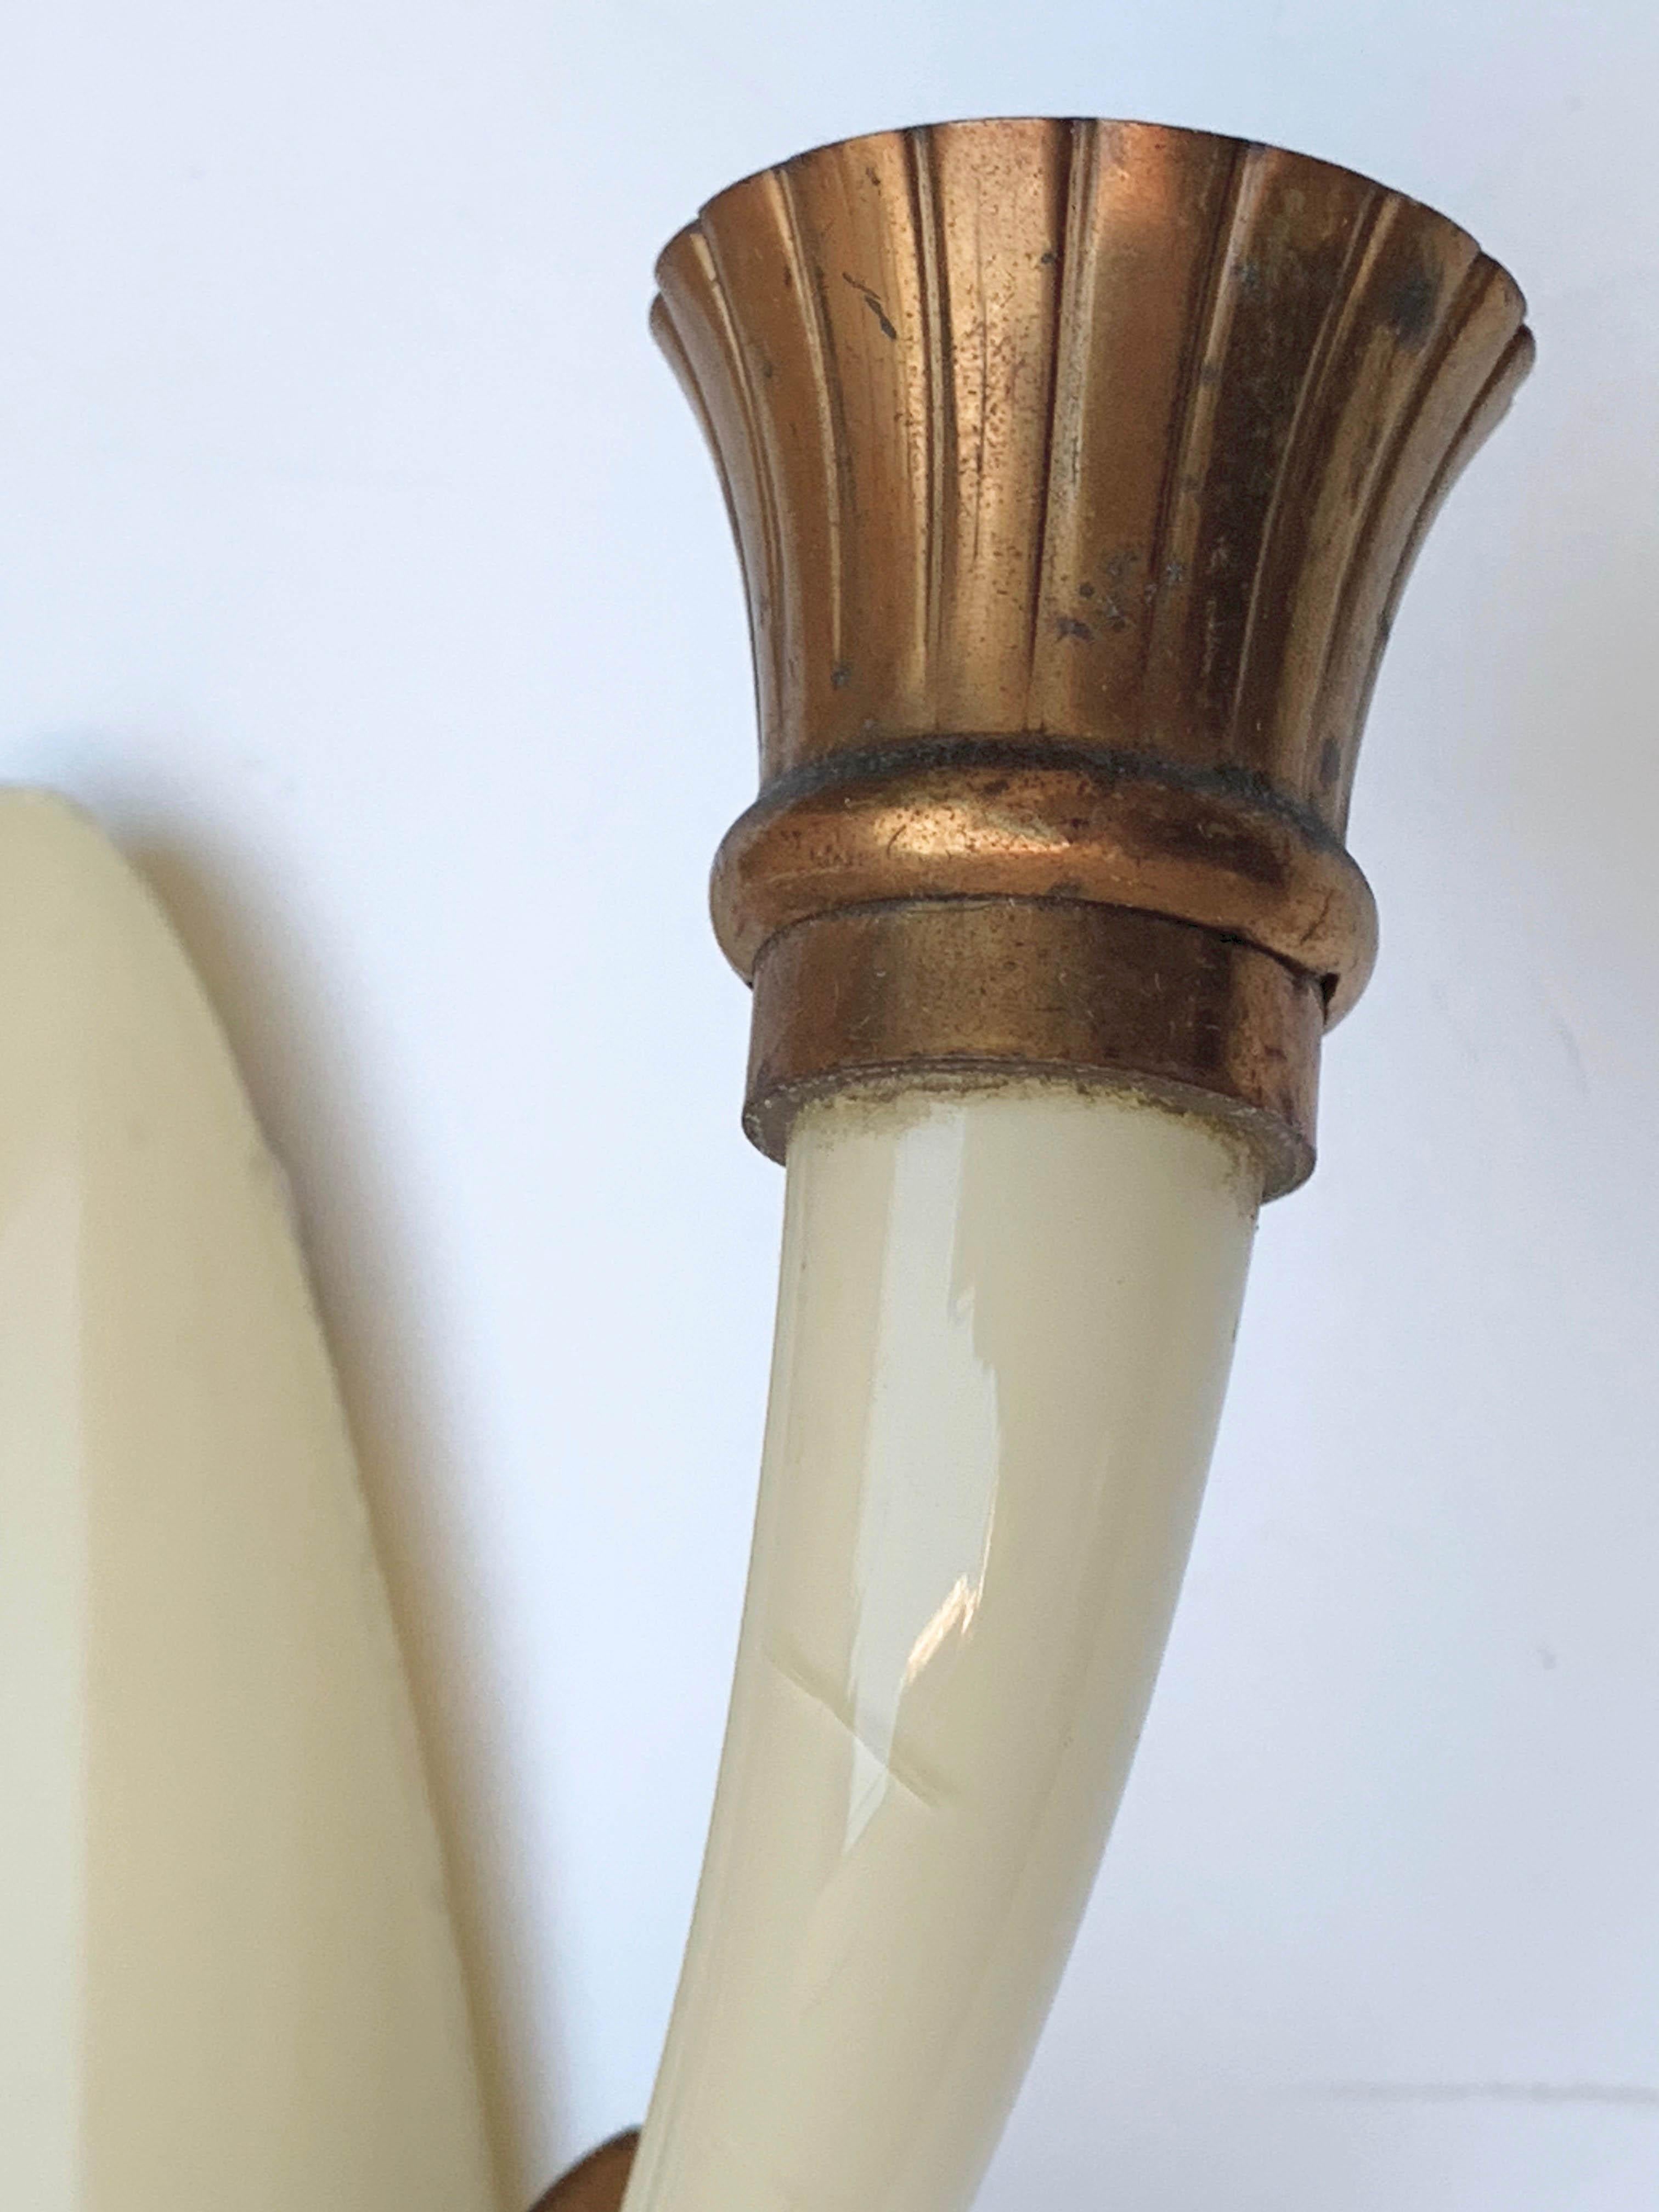 Pair of Blown Ivory White Murano Glass and Coppered Brass Italian Sconces, 1940s For Sale 9